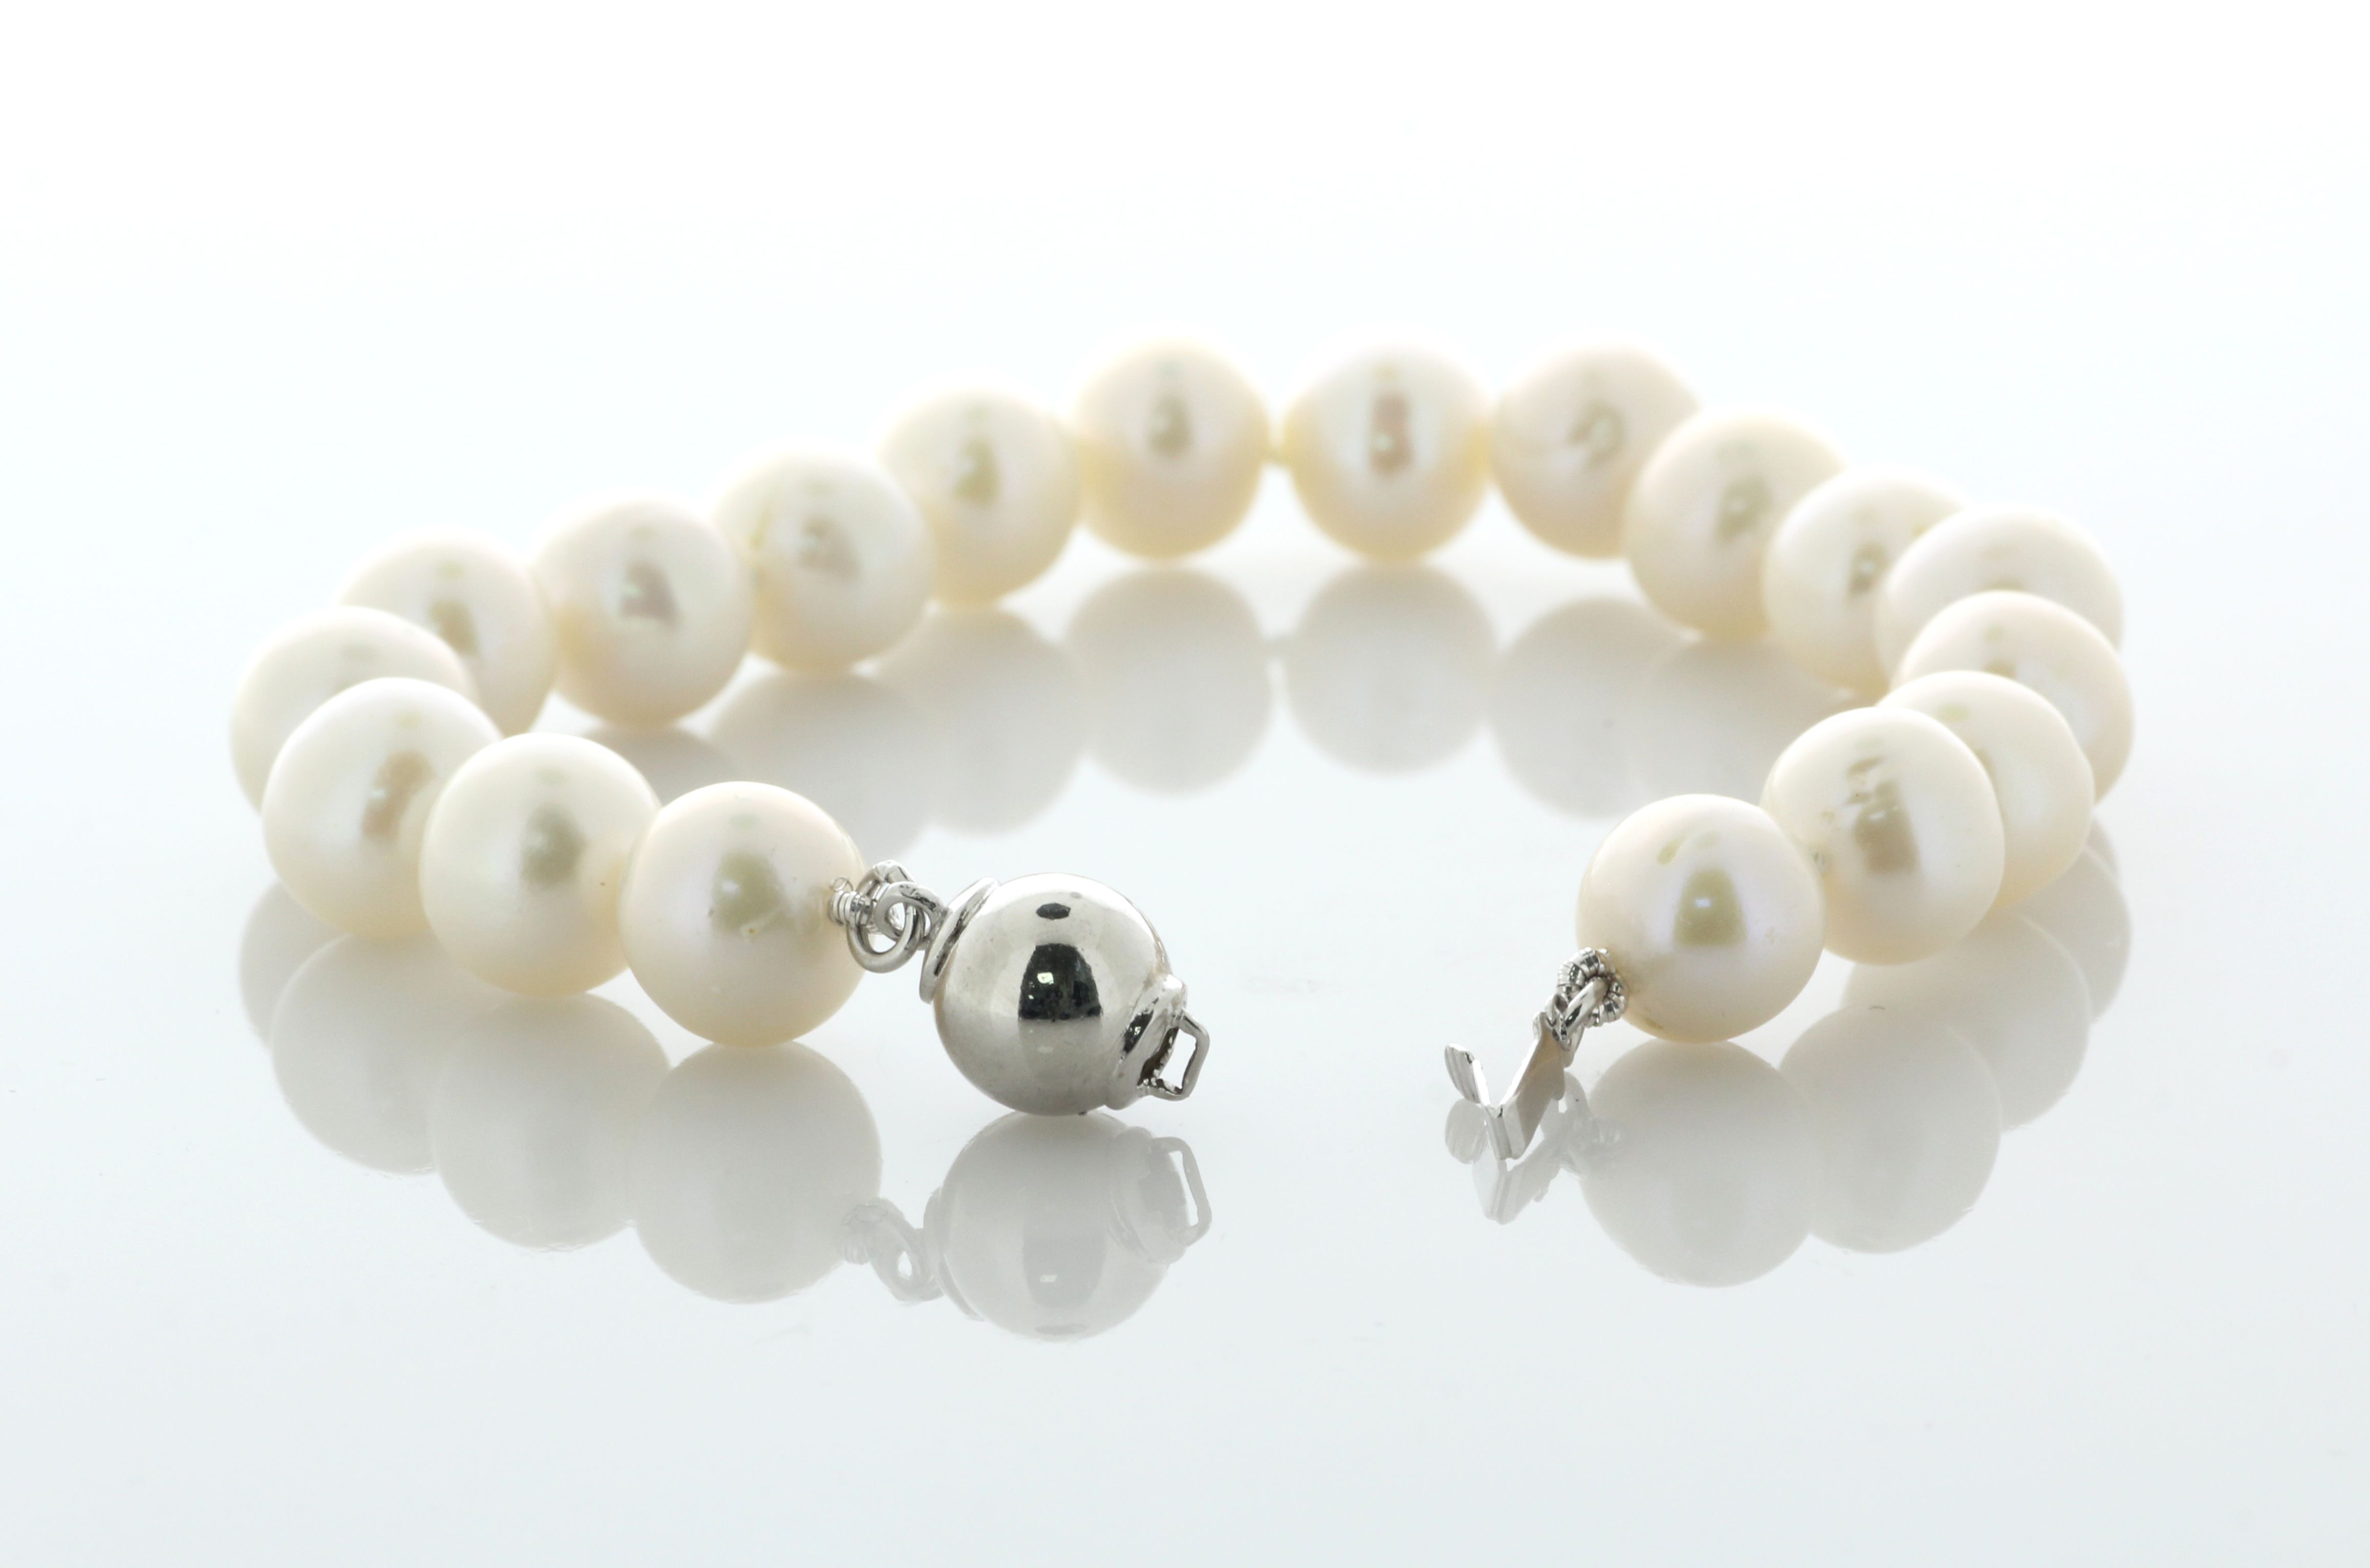 6.5 Inches Freshwater Cultured 8.5 - 9.0mm Pearl Bracelet With Silver Clasp - Image 3 of 4